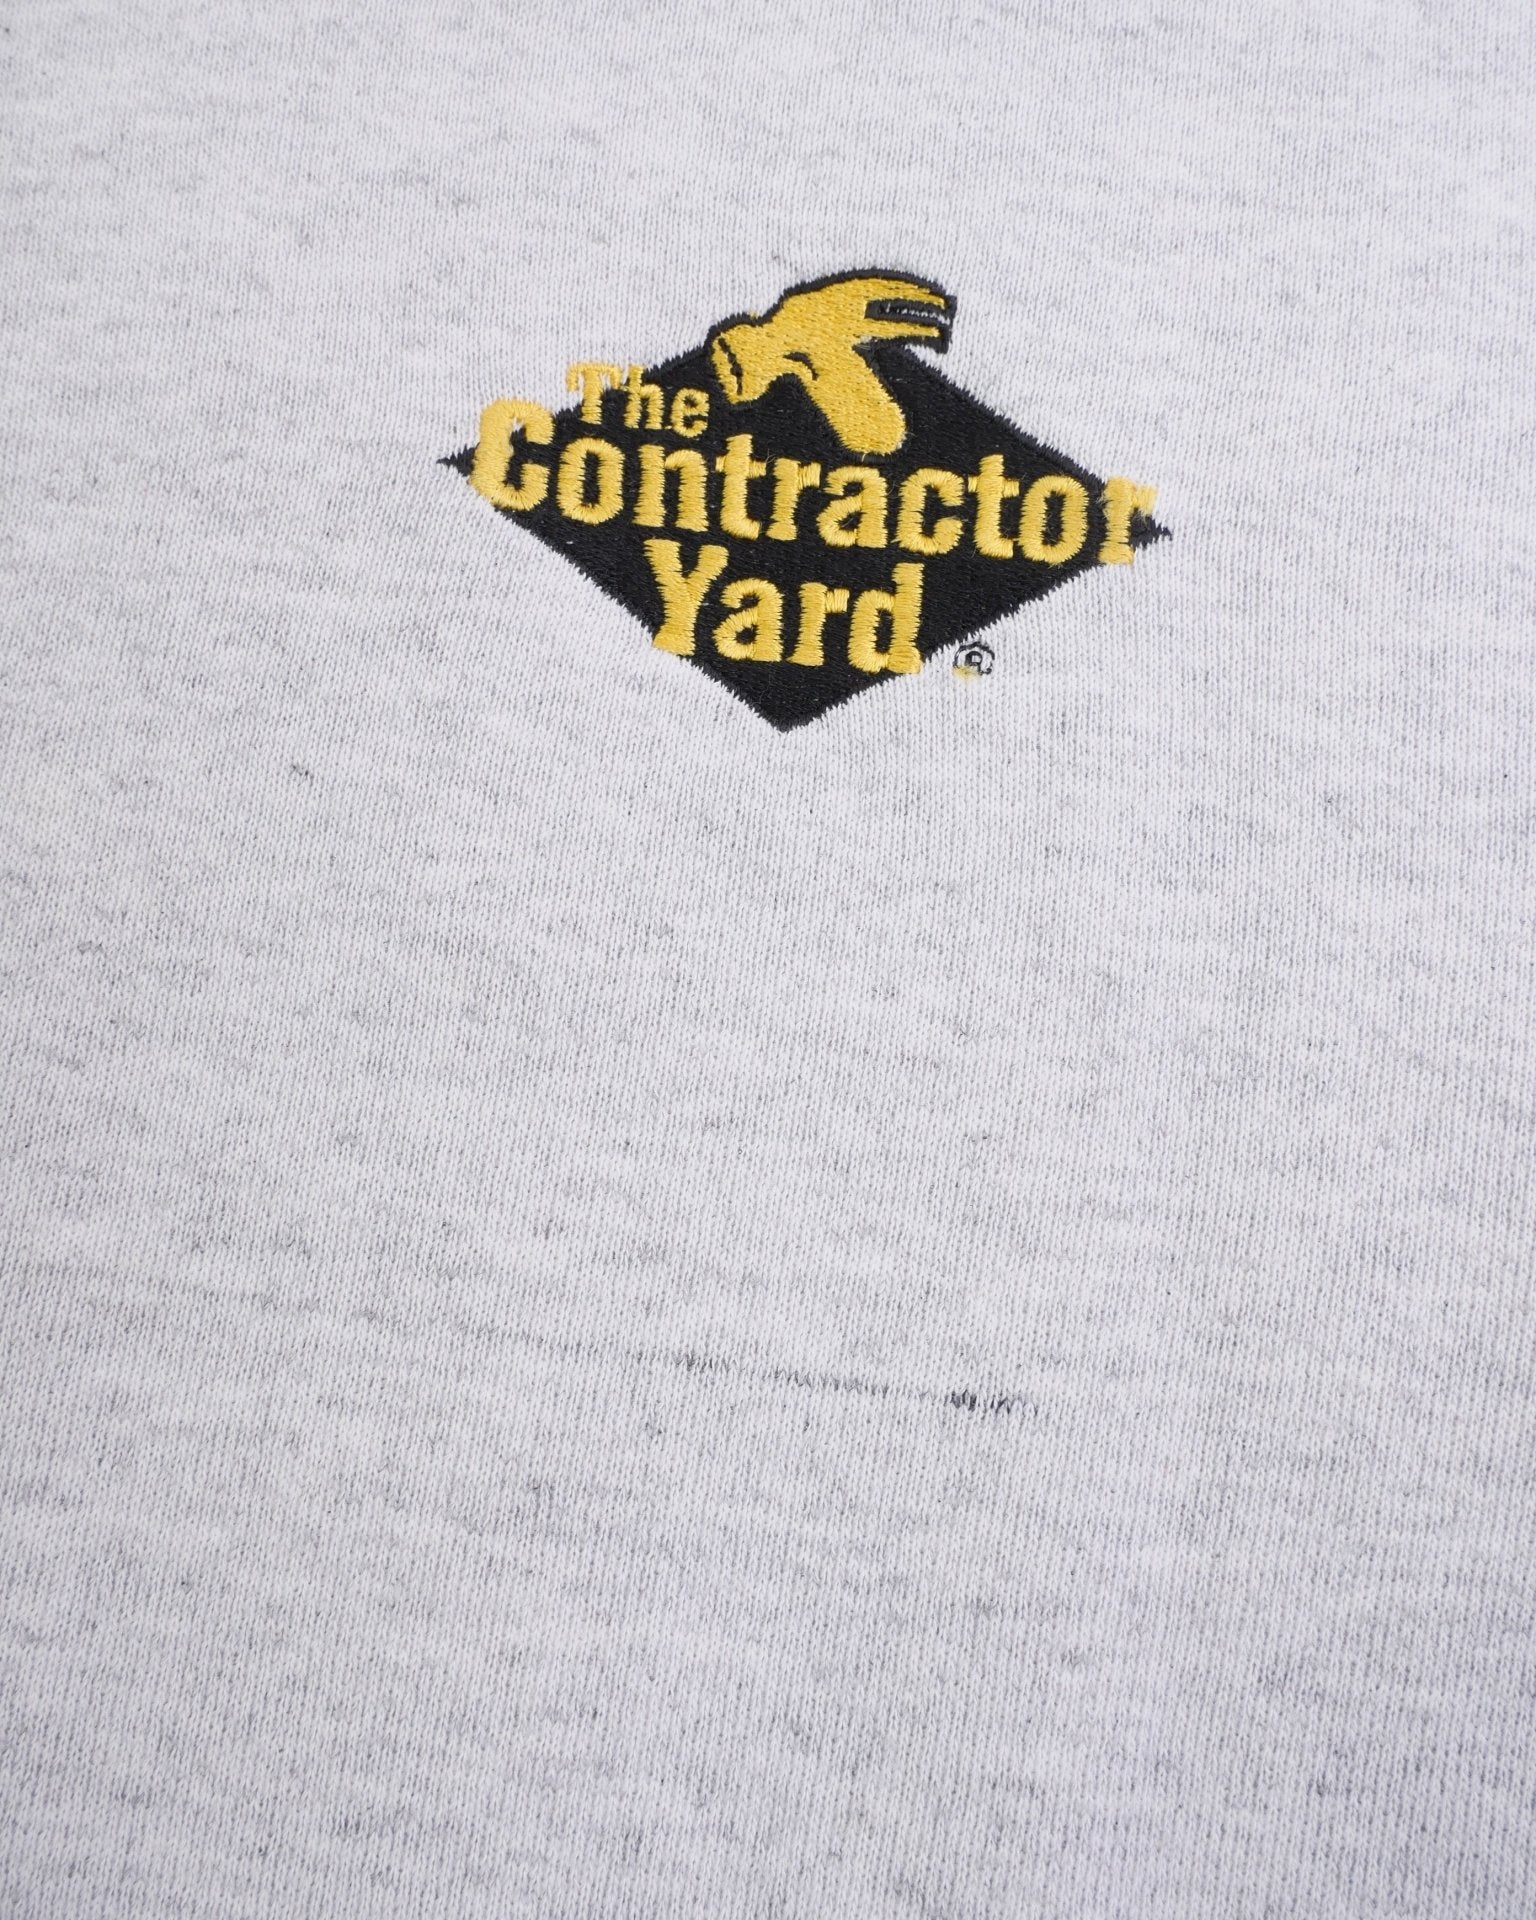 embroidered Logo 'the contractor yard' oversized grey Sweater - Peeces